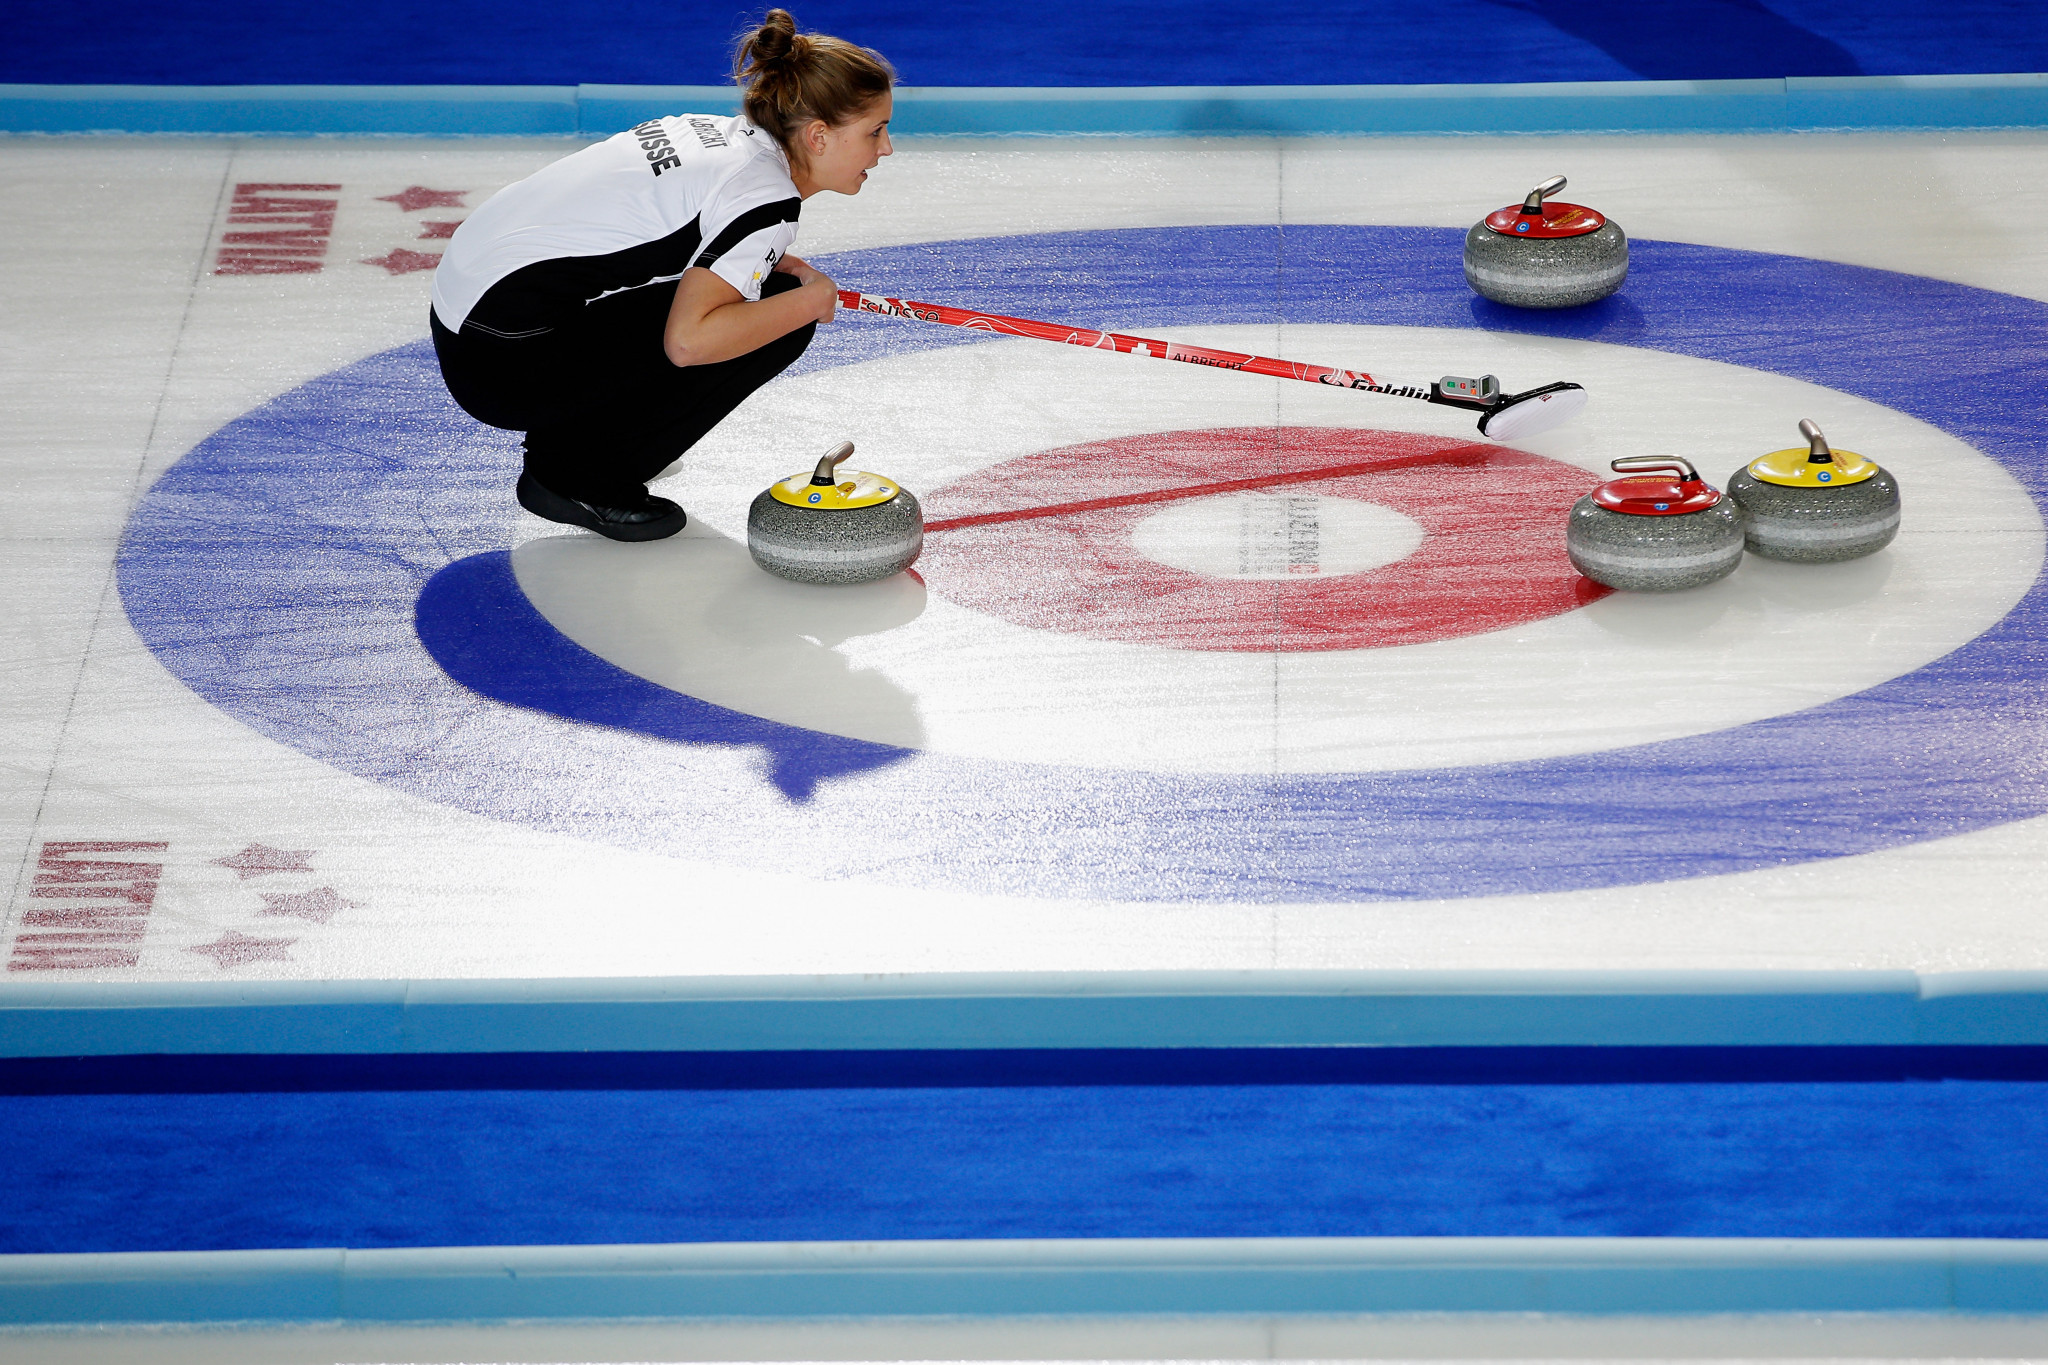 The World Women's Curling Championship is set to return following a two-year hiatus due to the coronavirus pandemic ©Getty Images